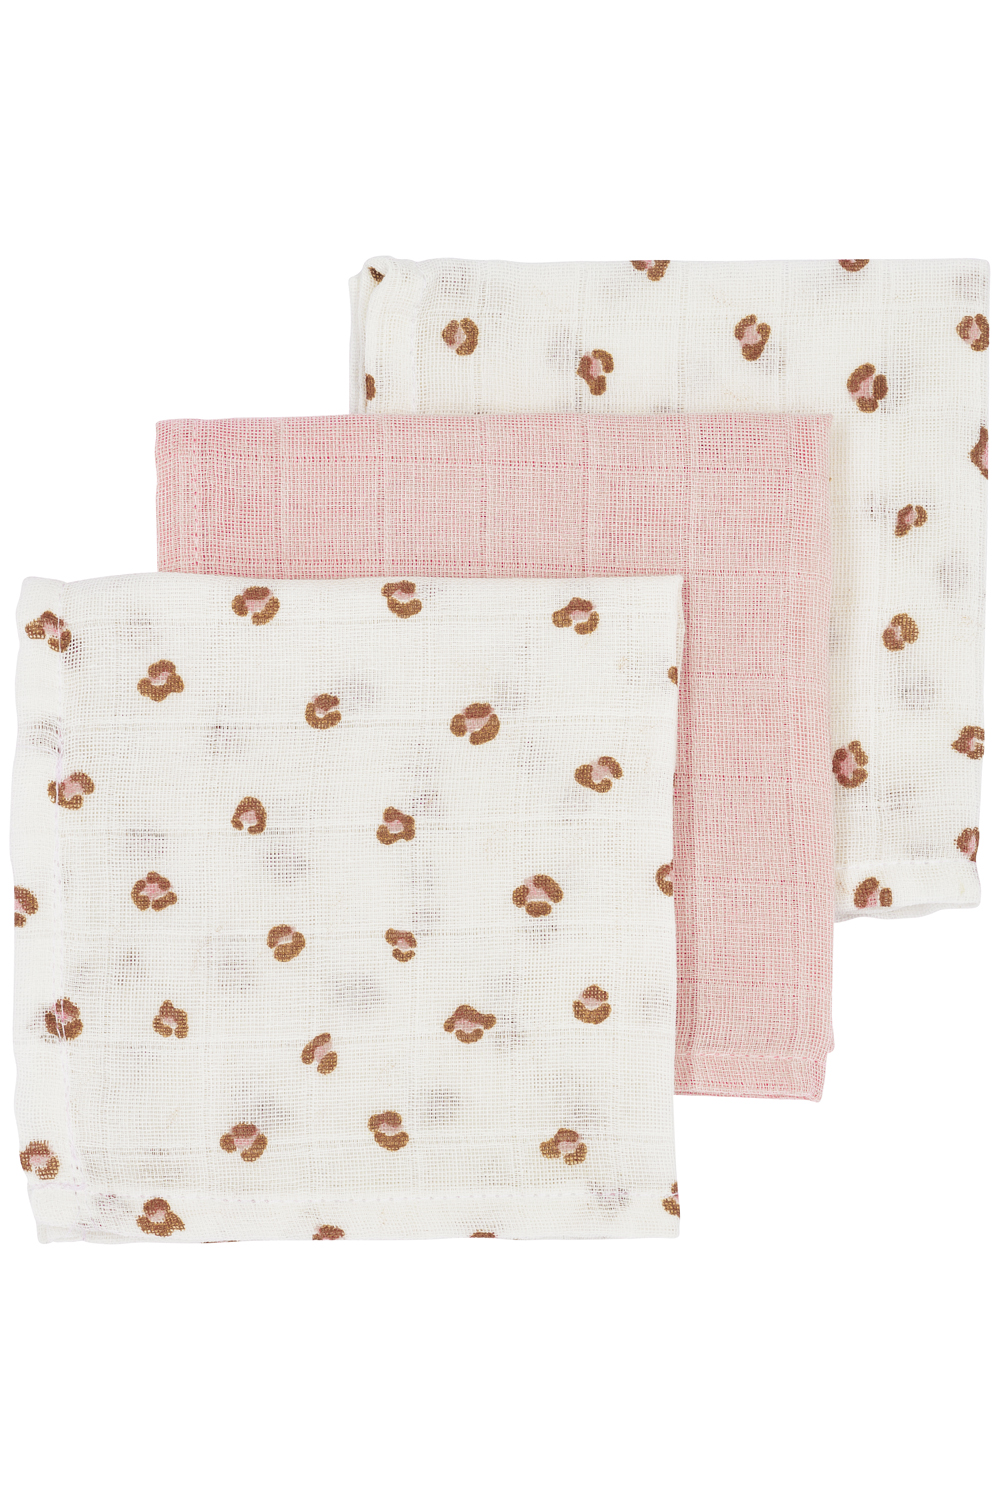 Facecloth 3-pack muslin Mini Panther - soft pink - 30x30cm